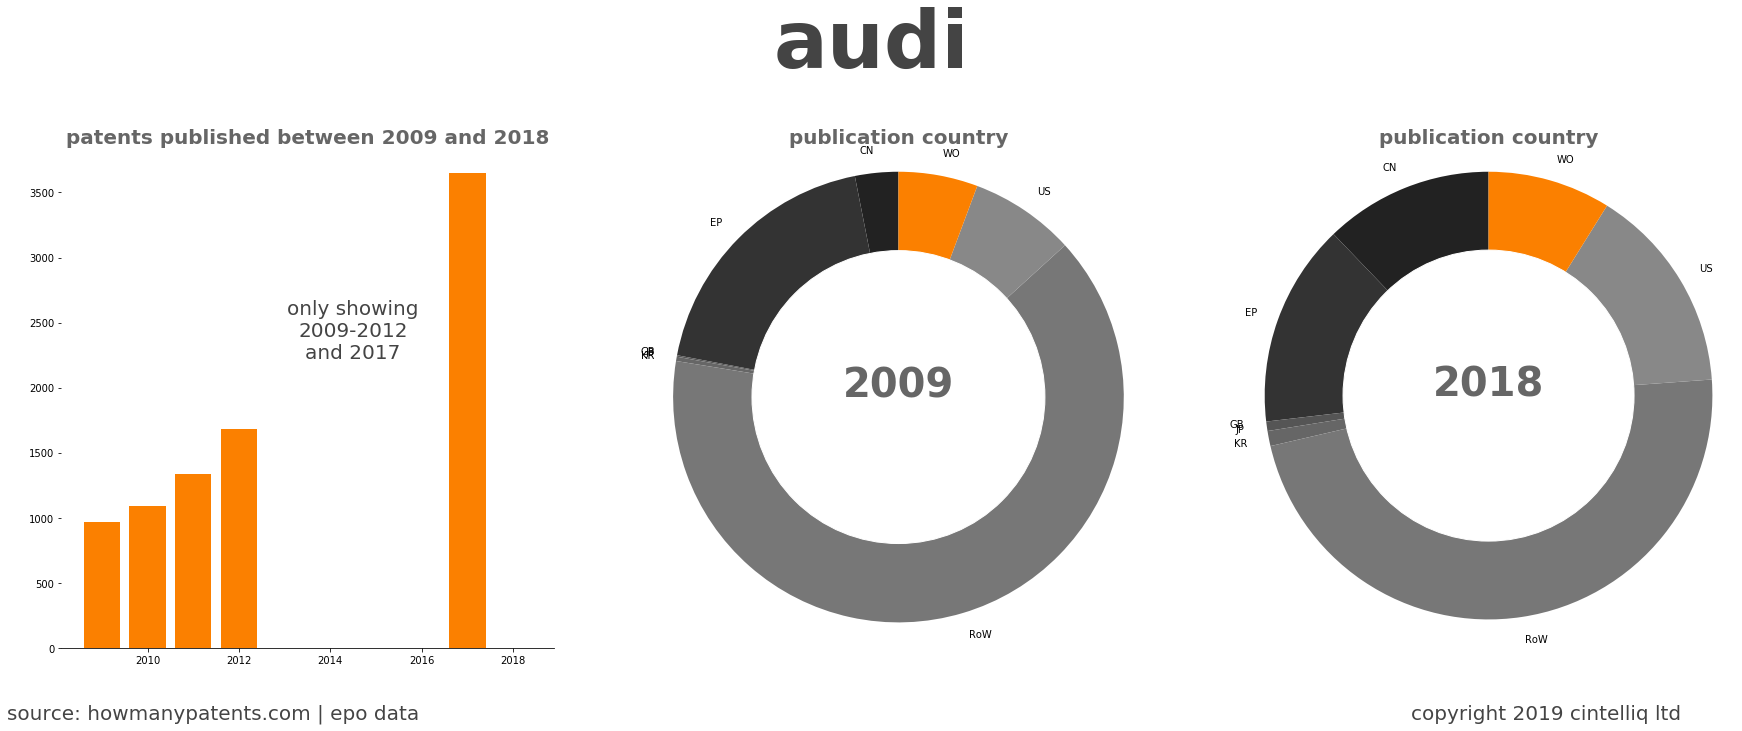 summary of patents for Audi